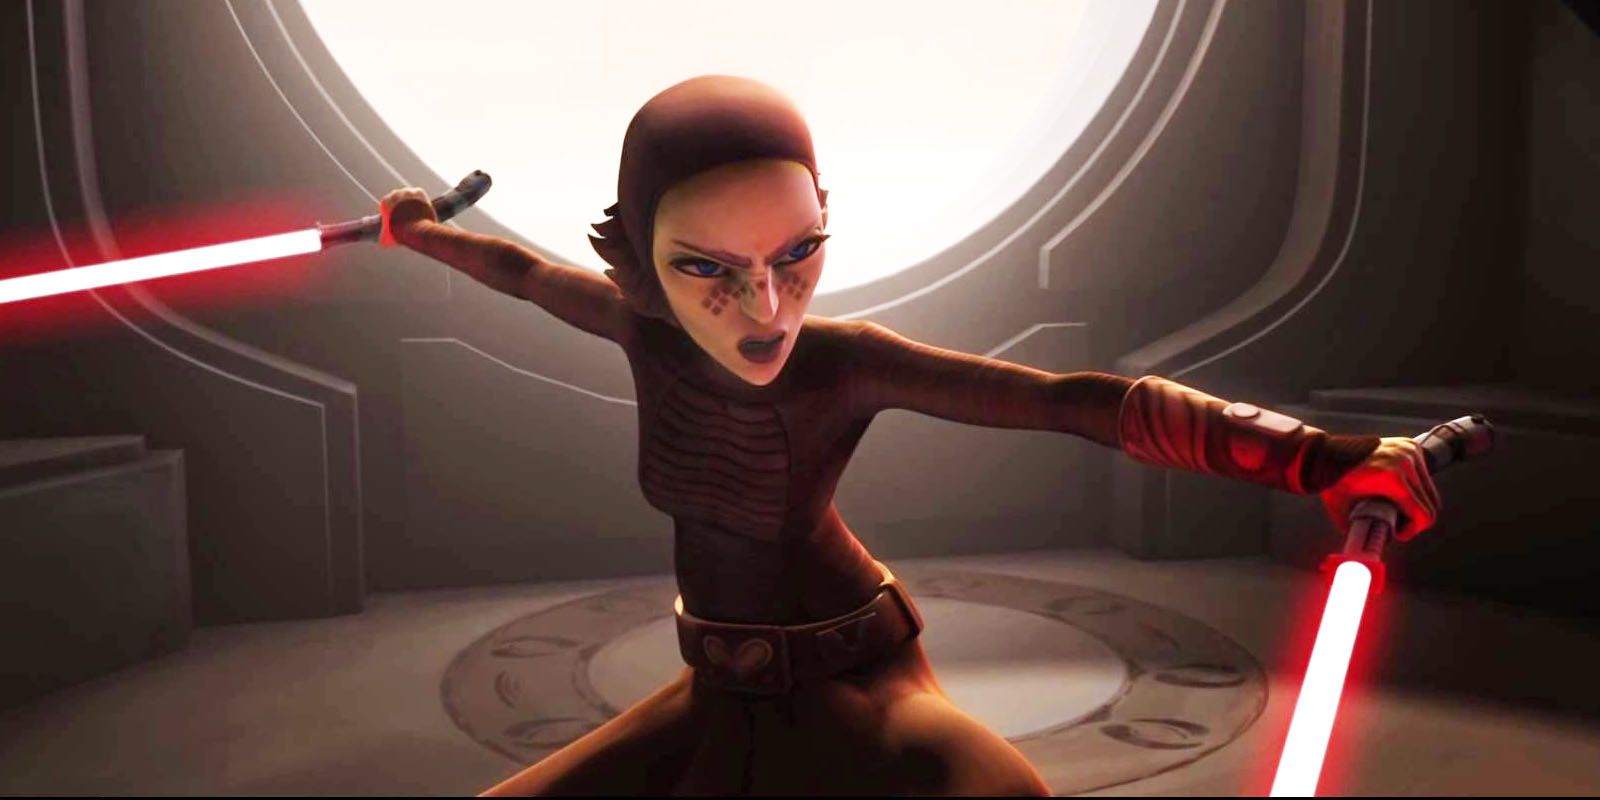 Star Wars The Clone Wars 10 Burning Questions That Season 7 Needs To Answer Before Ending